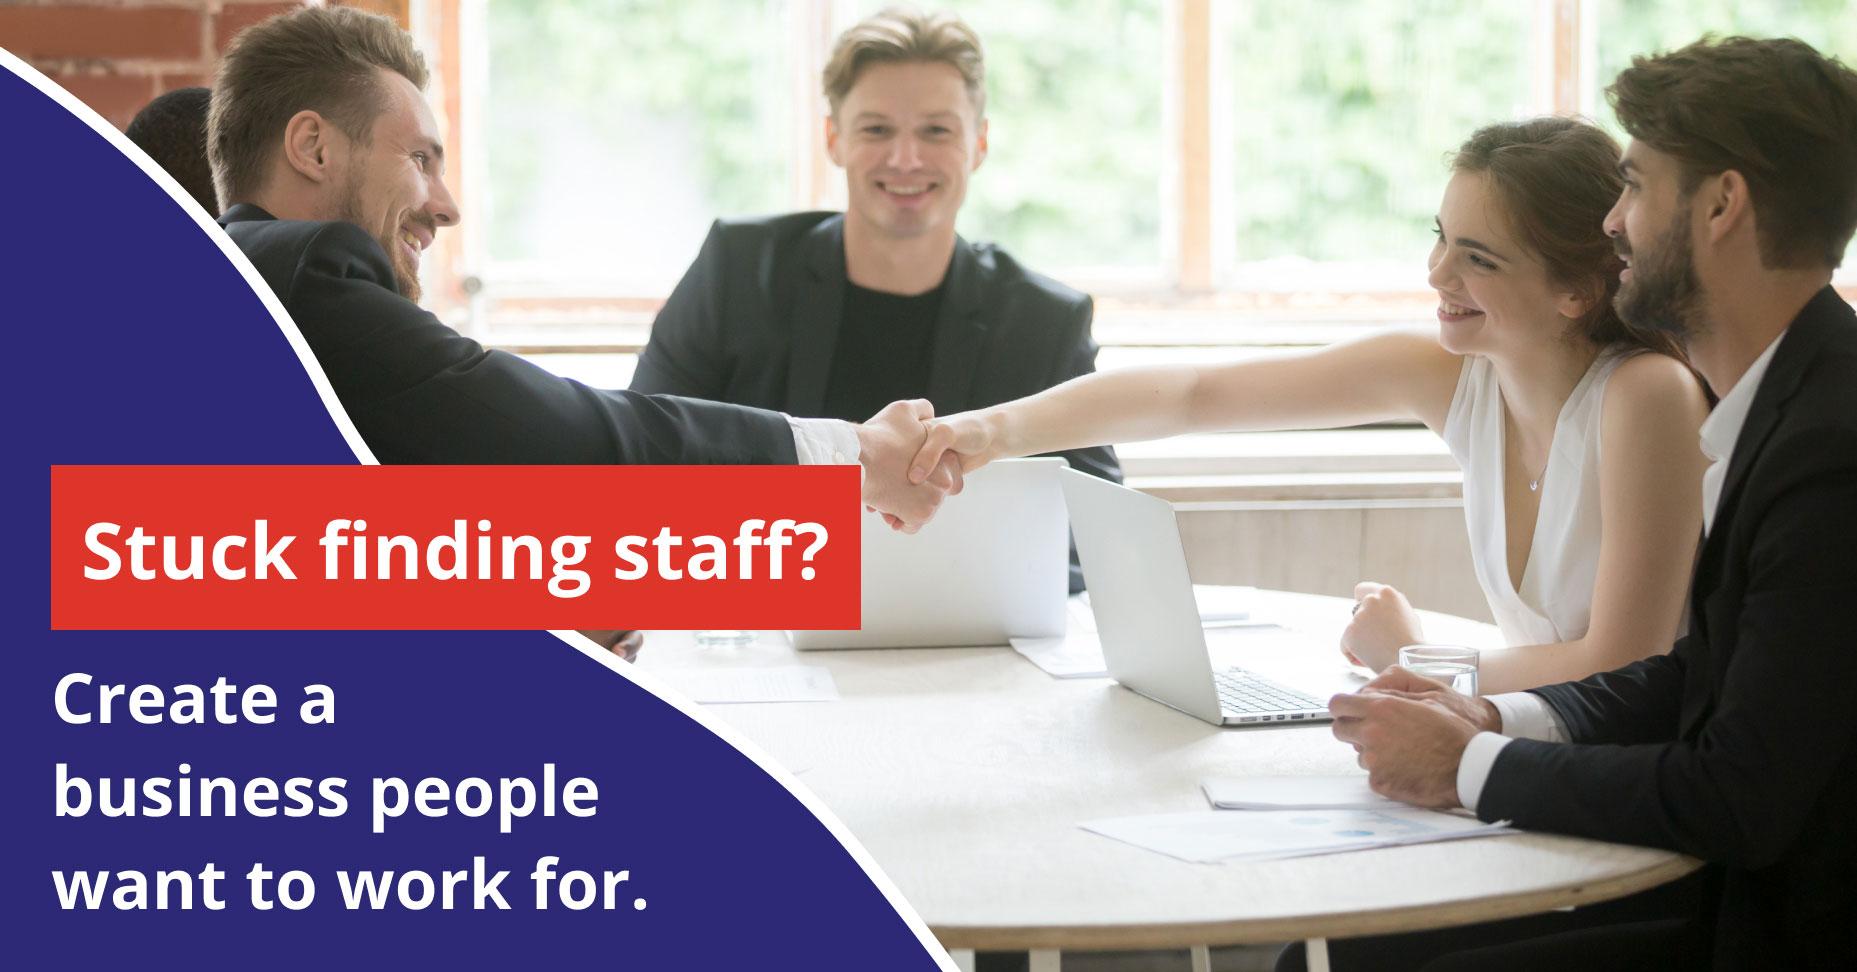 Stuck finding staff? Create a business people want to work for.